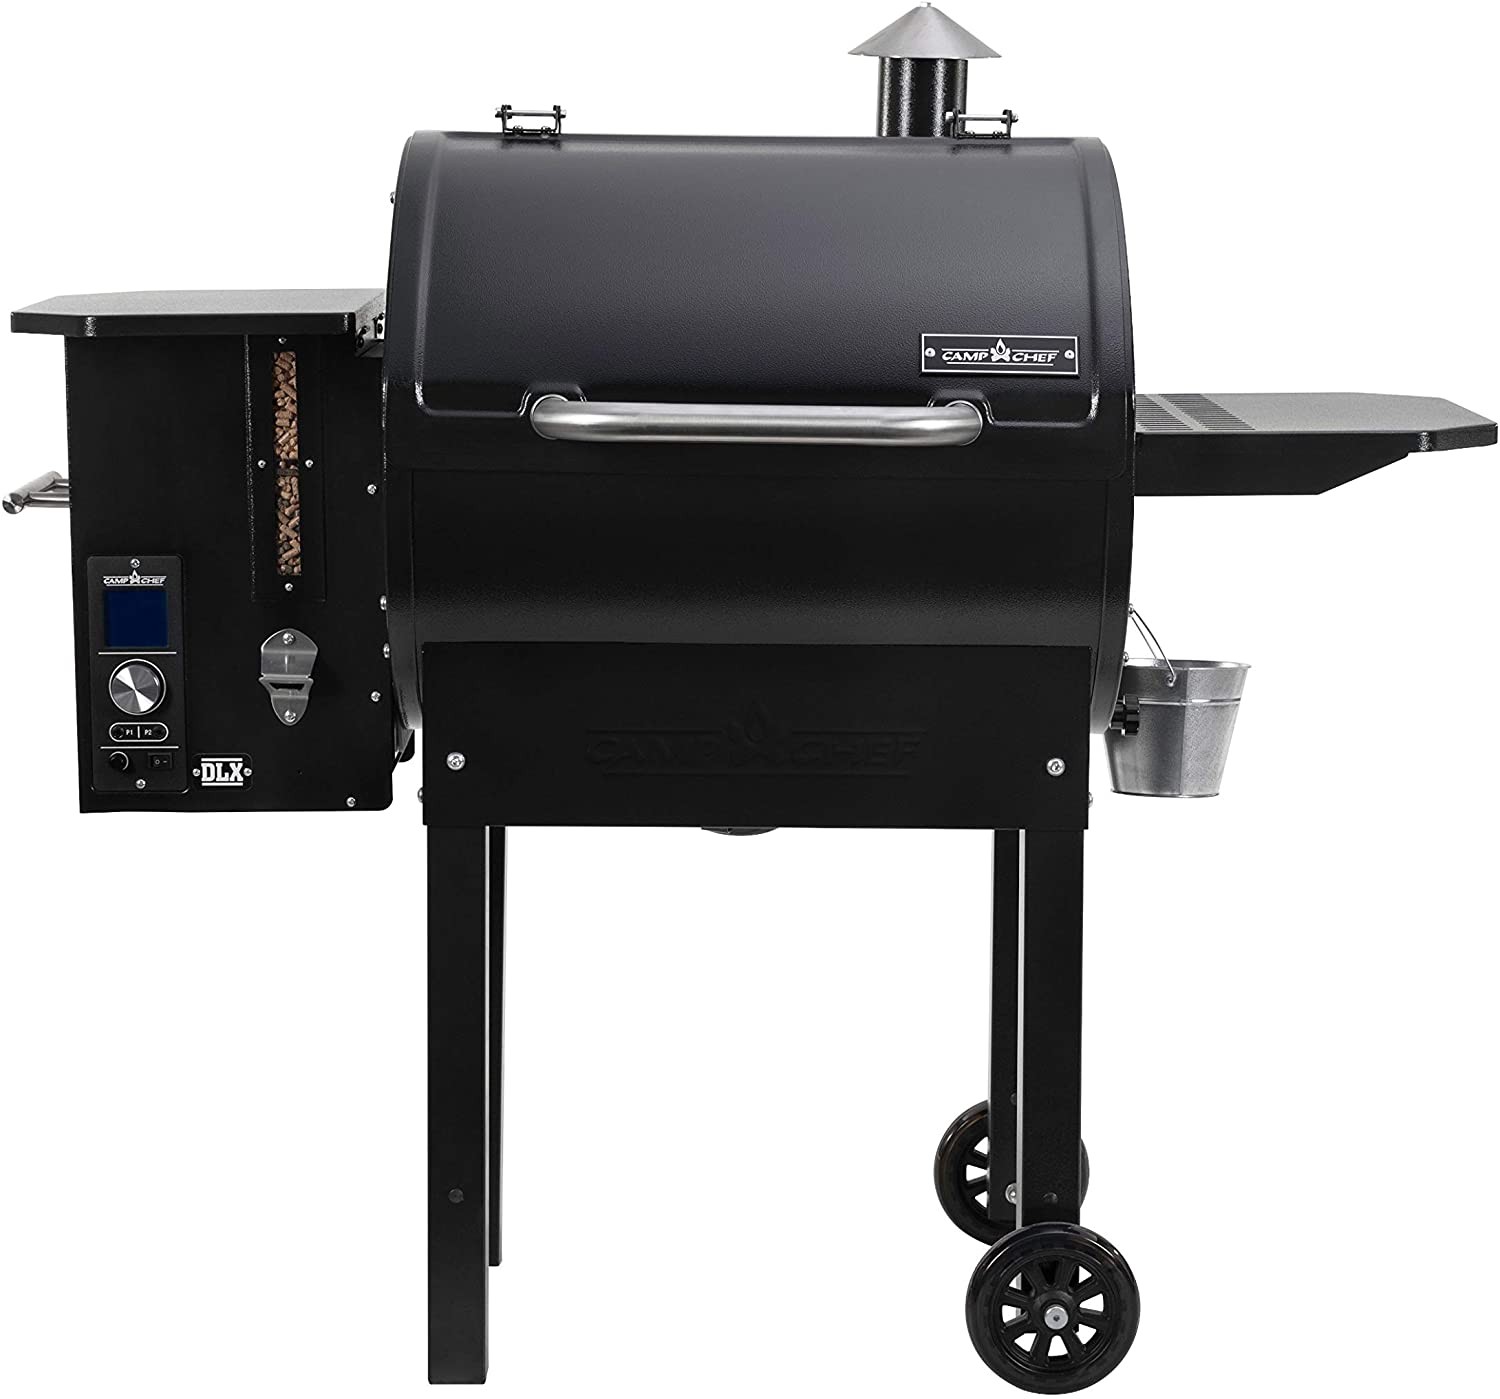 Trager Pro Controller Wiring Camp Chef Pg24 Pellet Grill and Smoker Bbq with Digital Of Trager Pro Controller Wiring